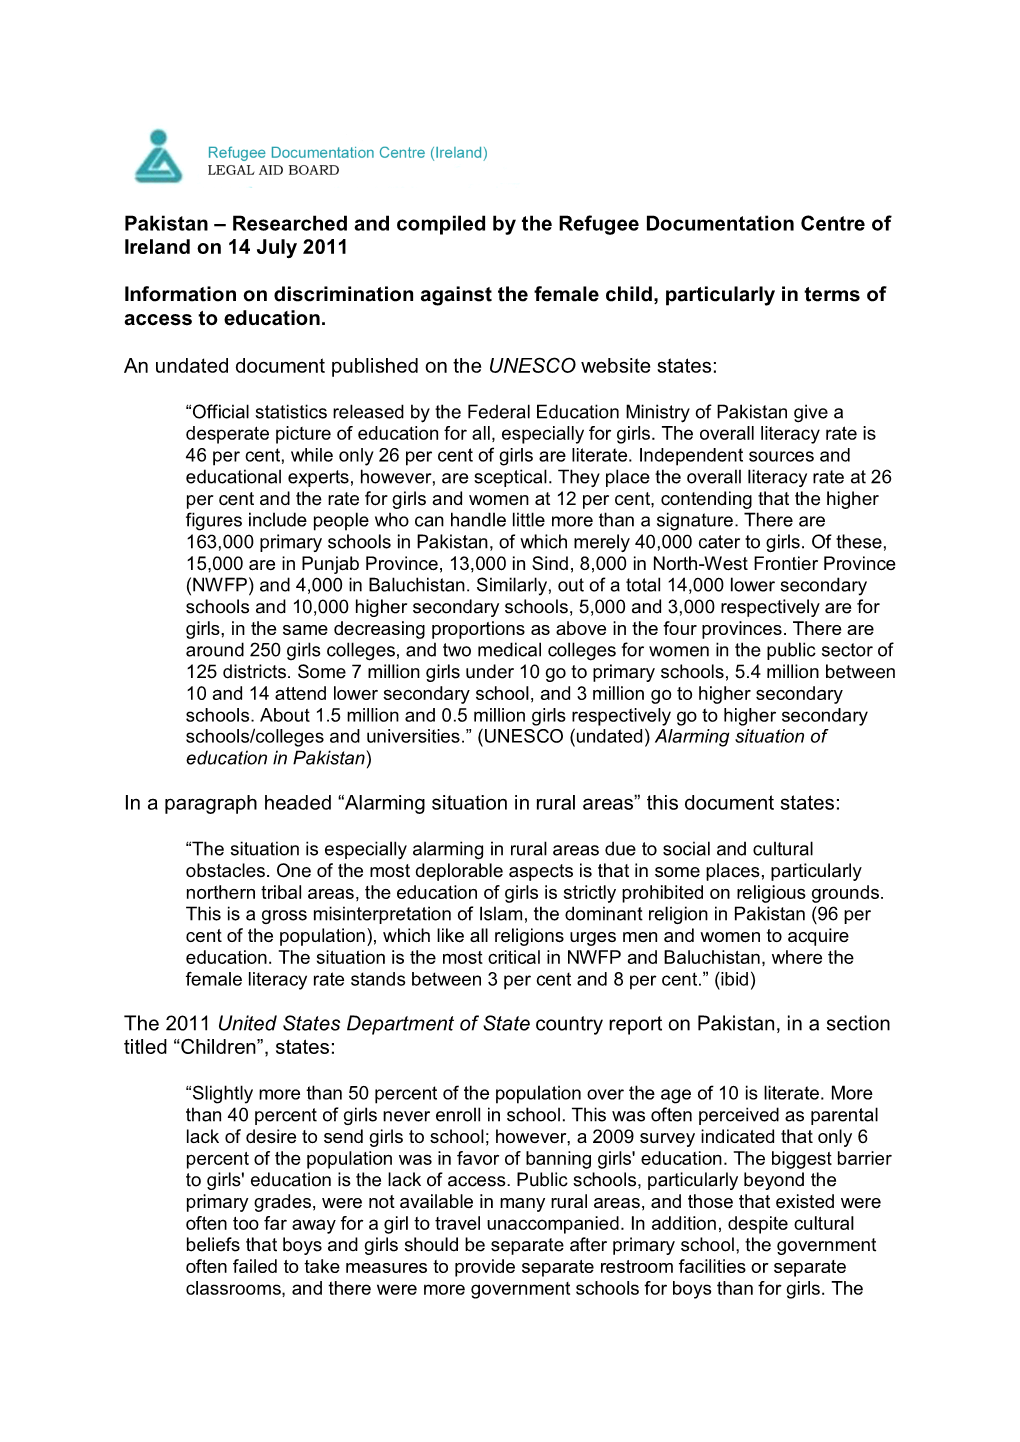 Pakistan – Researched and Compiled by the Refugee Documentation Centre of Ireland on 14 July 2011